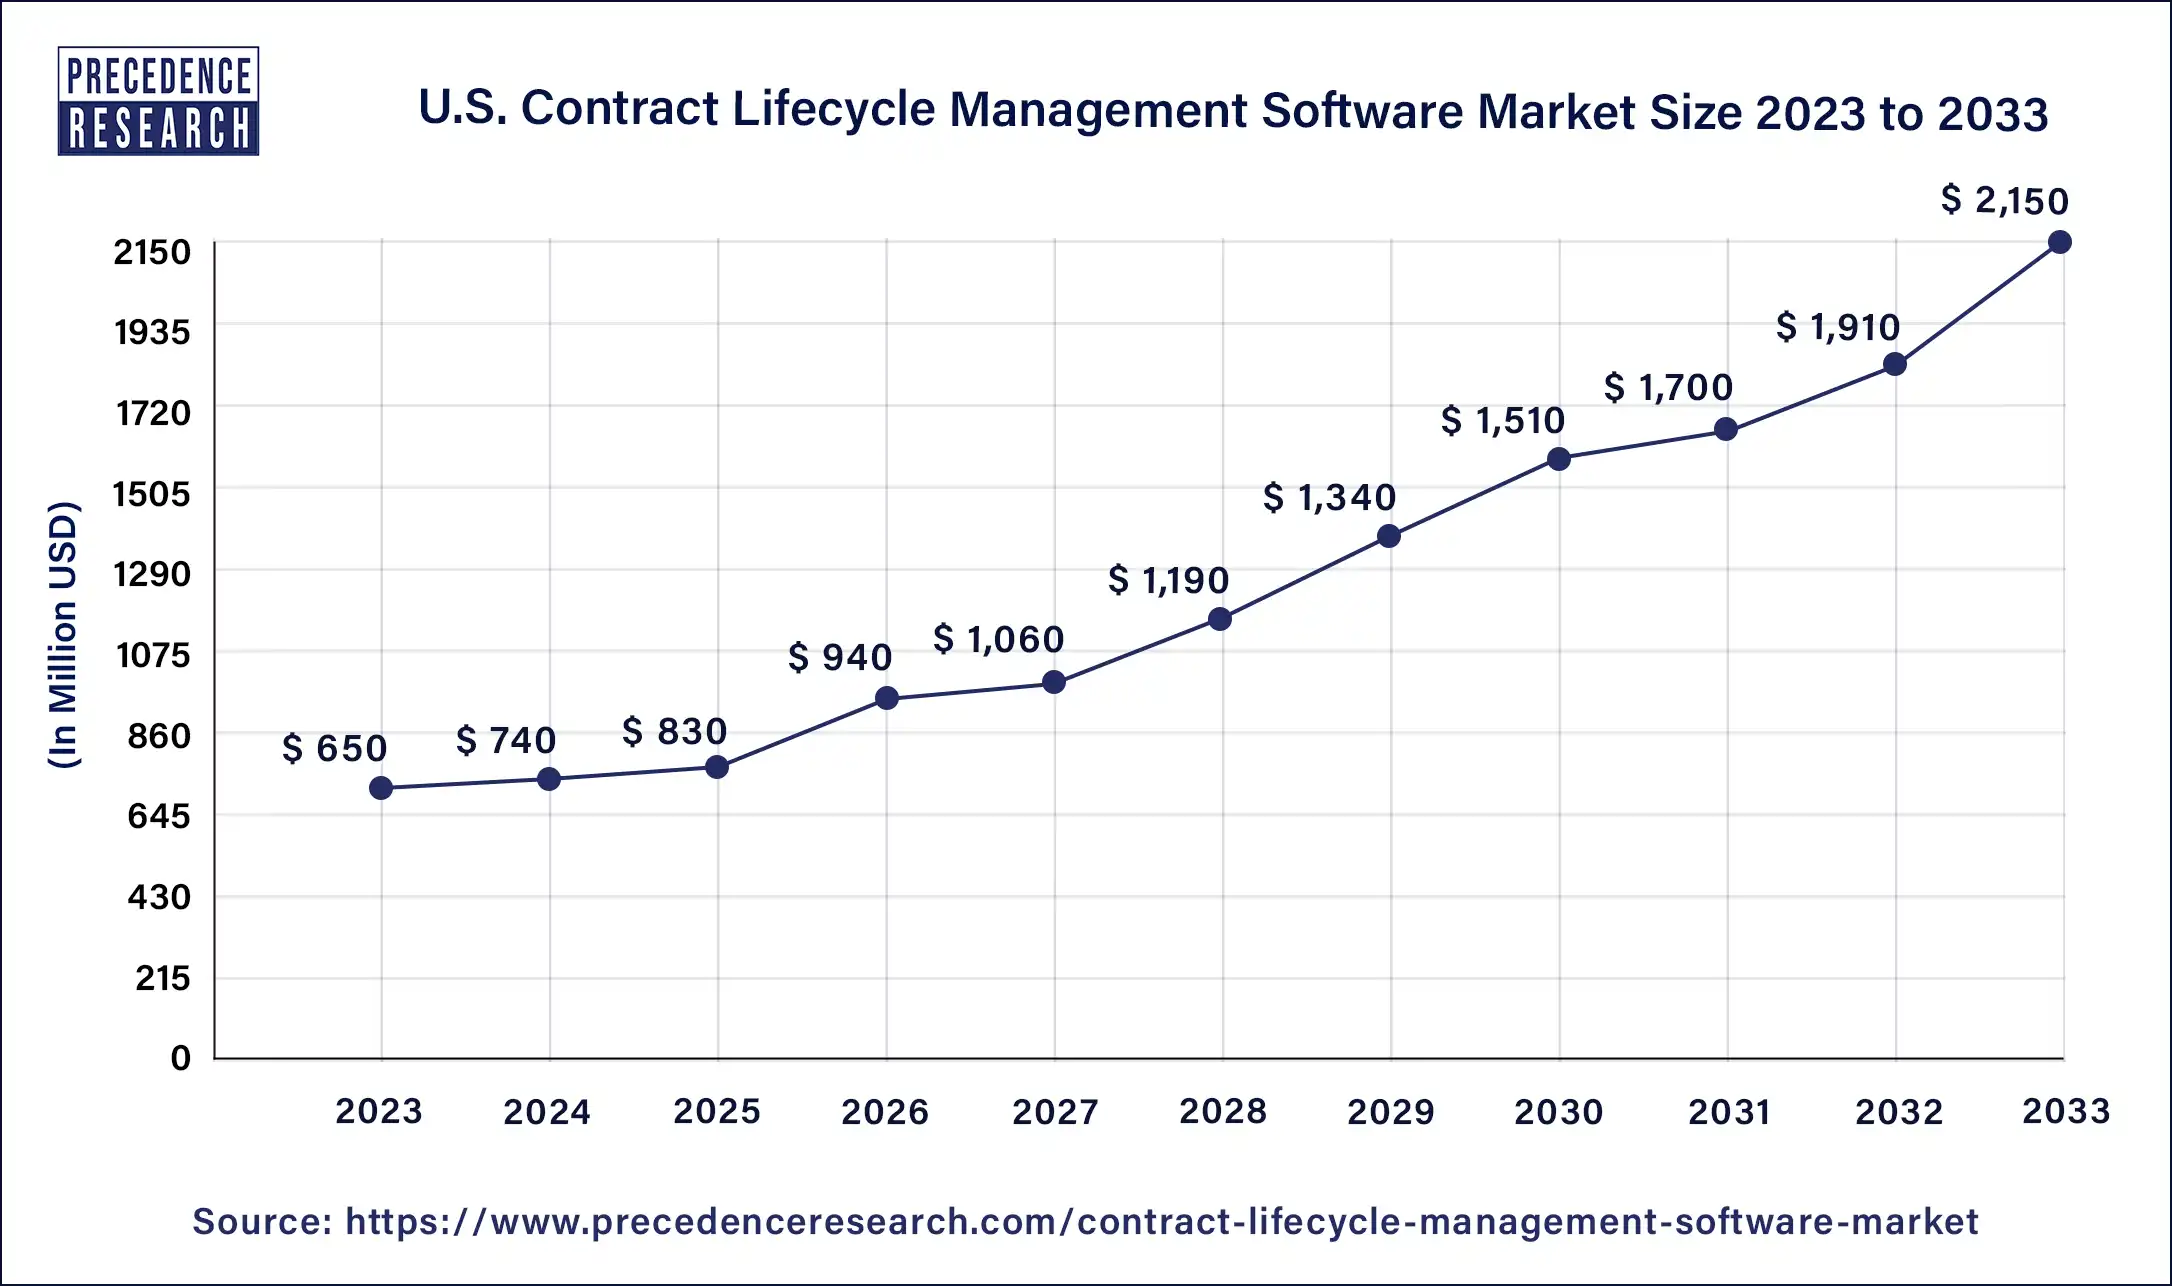 U.S. Contract Lifecycle Management Software Market Size 2024 to 2033